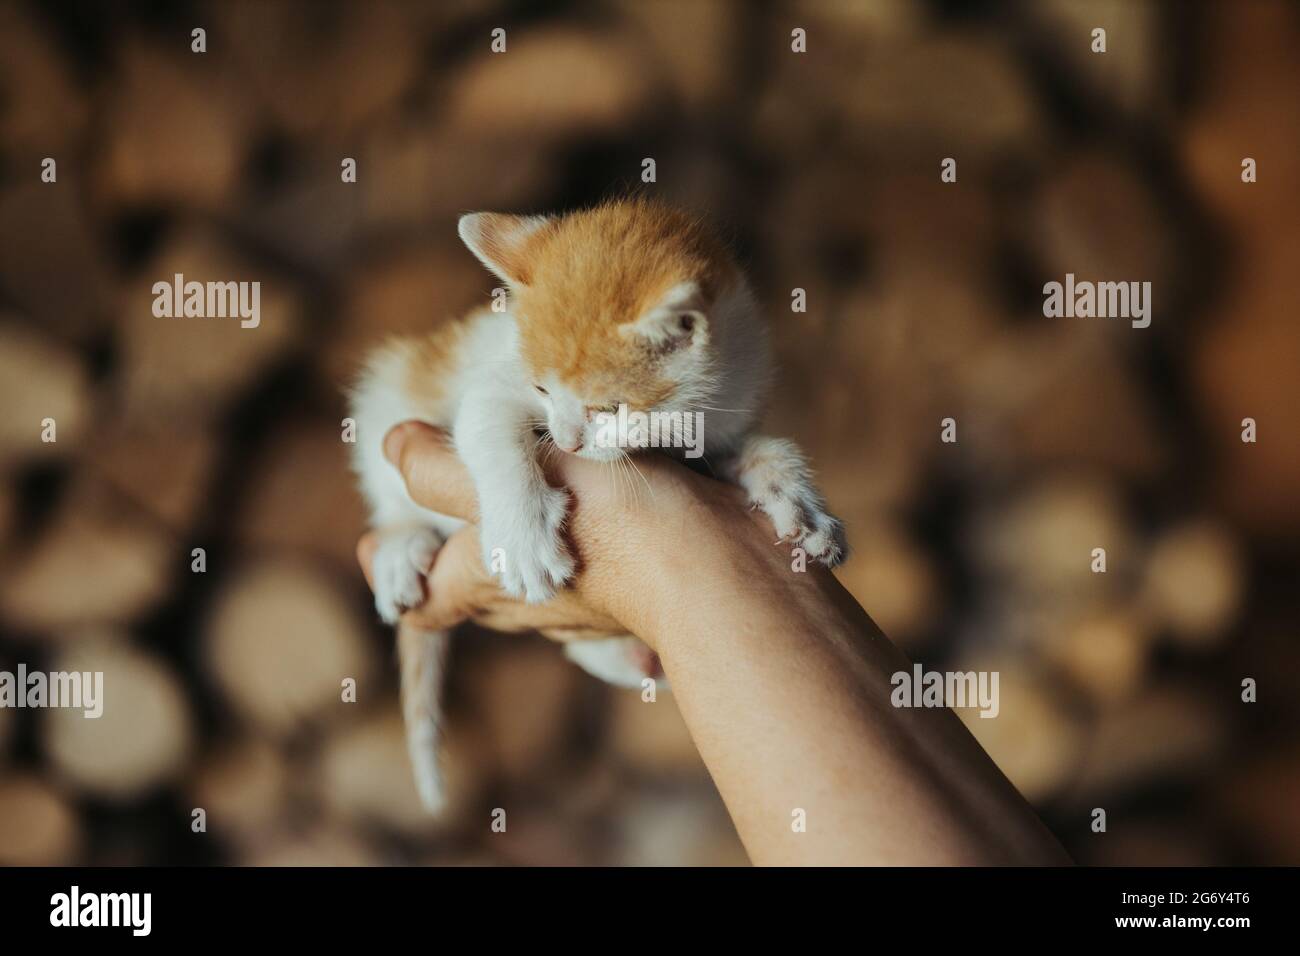 Closeup of a person holding an adorable fluffy small colorful  kitten Stock Photo